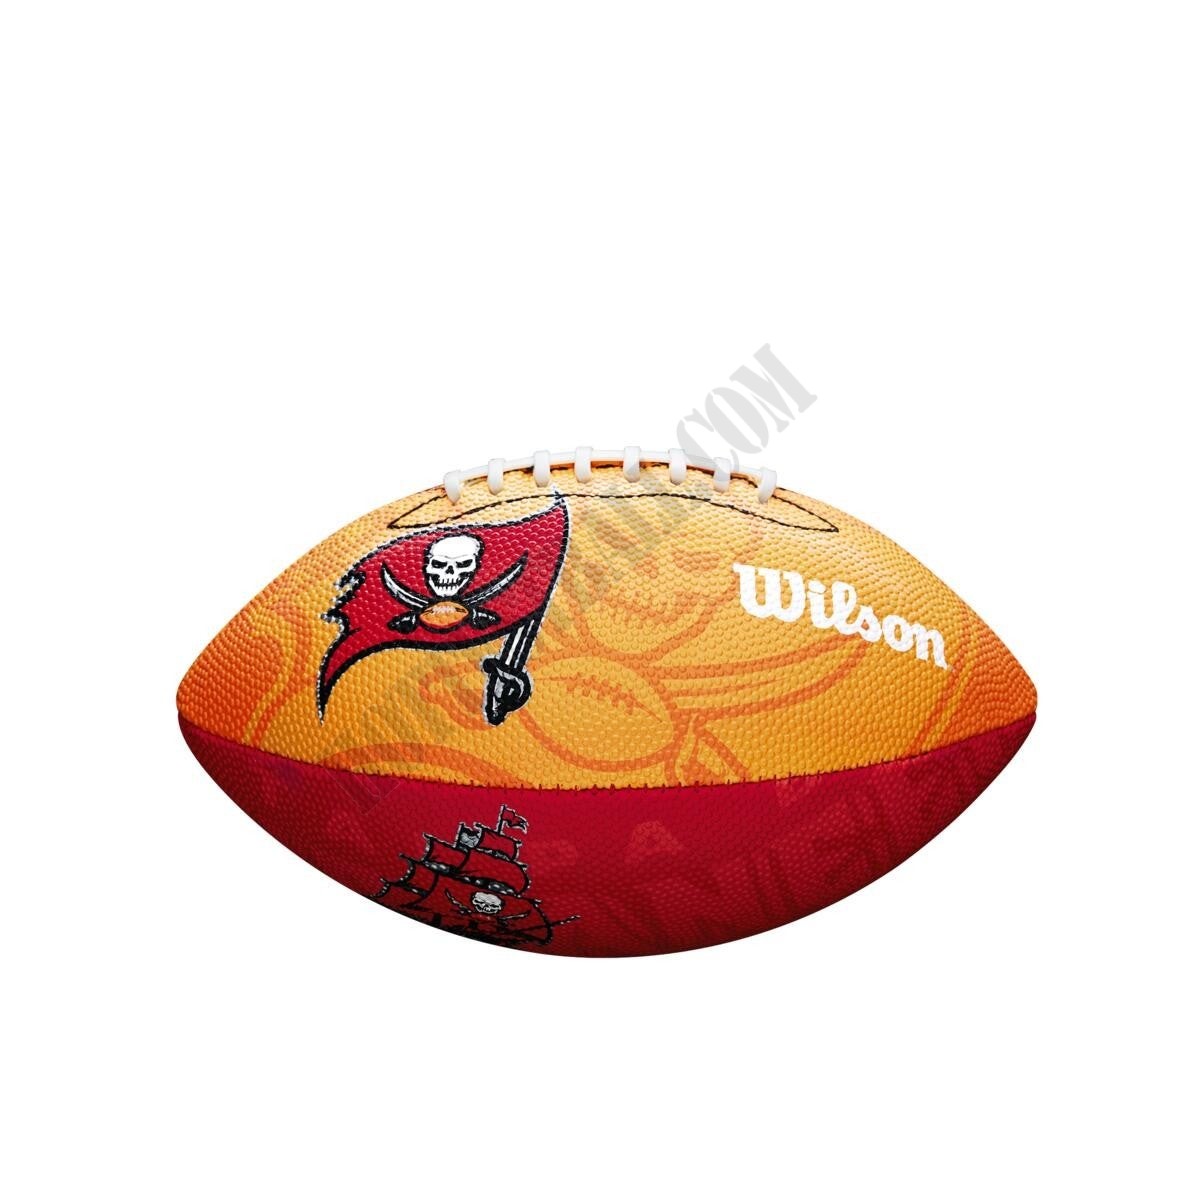 NFL Team Tailgate Football - Tampa Bay Buccaneers ● Wilson Promotions - NFL Team Tailgate Football - Tampa Bay Buccaneers ● Wilson Promotions